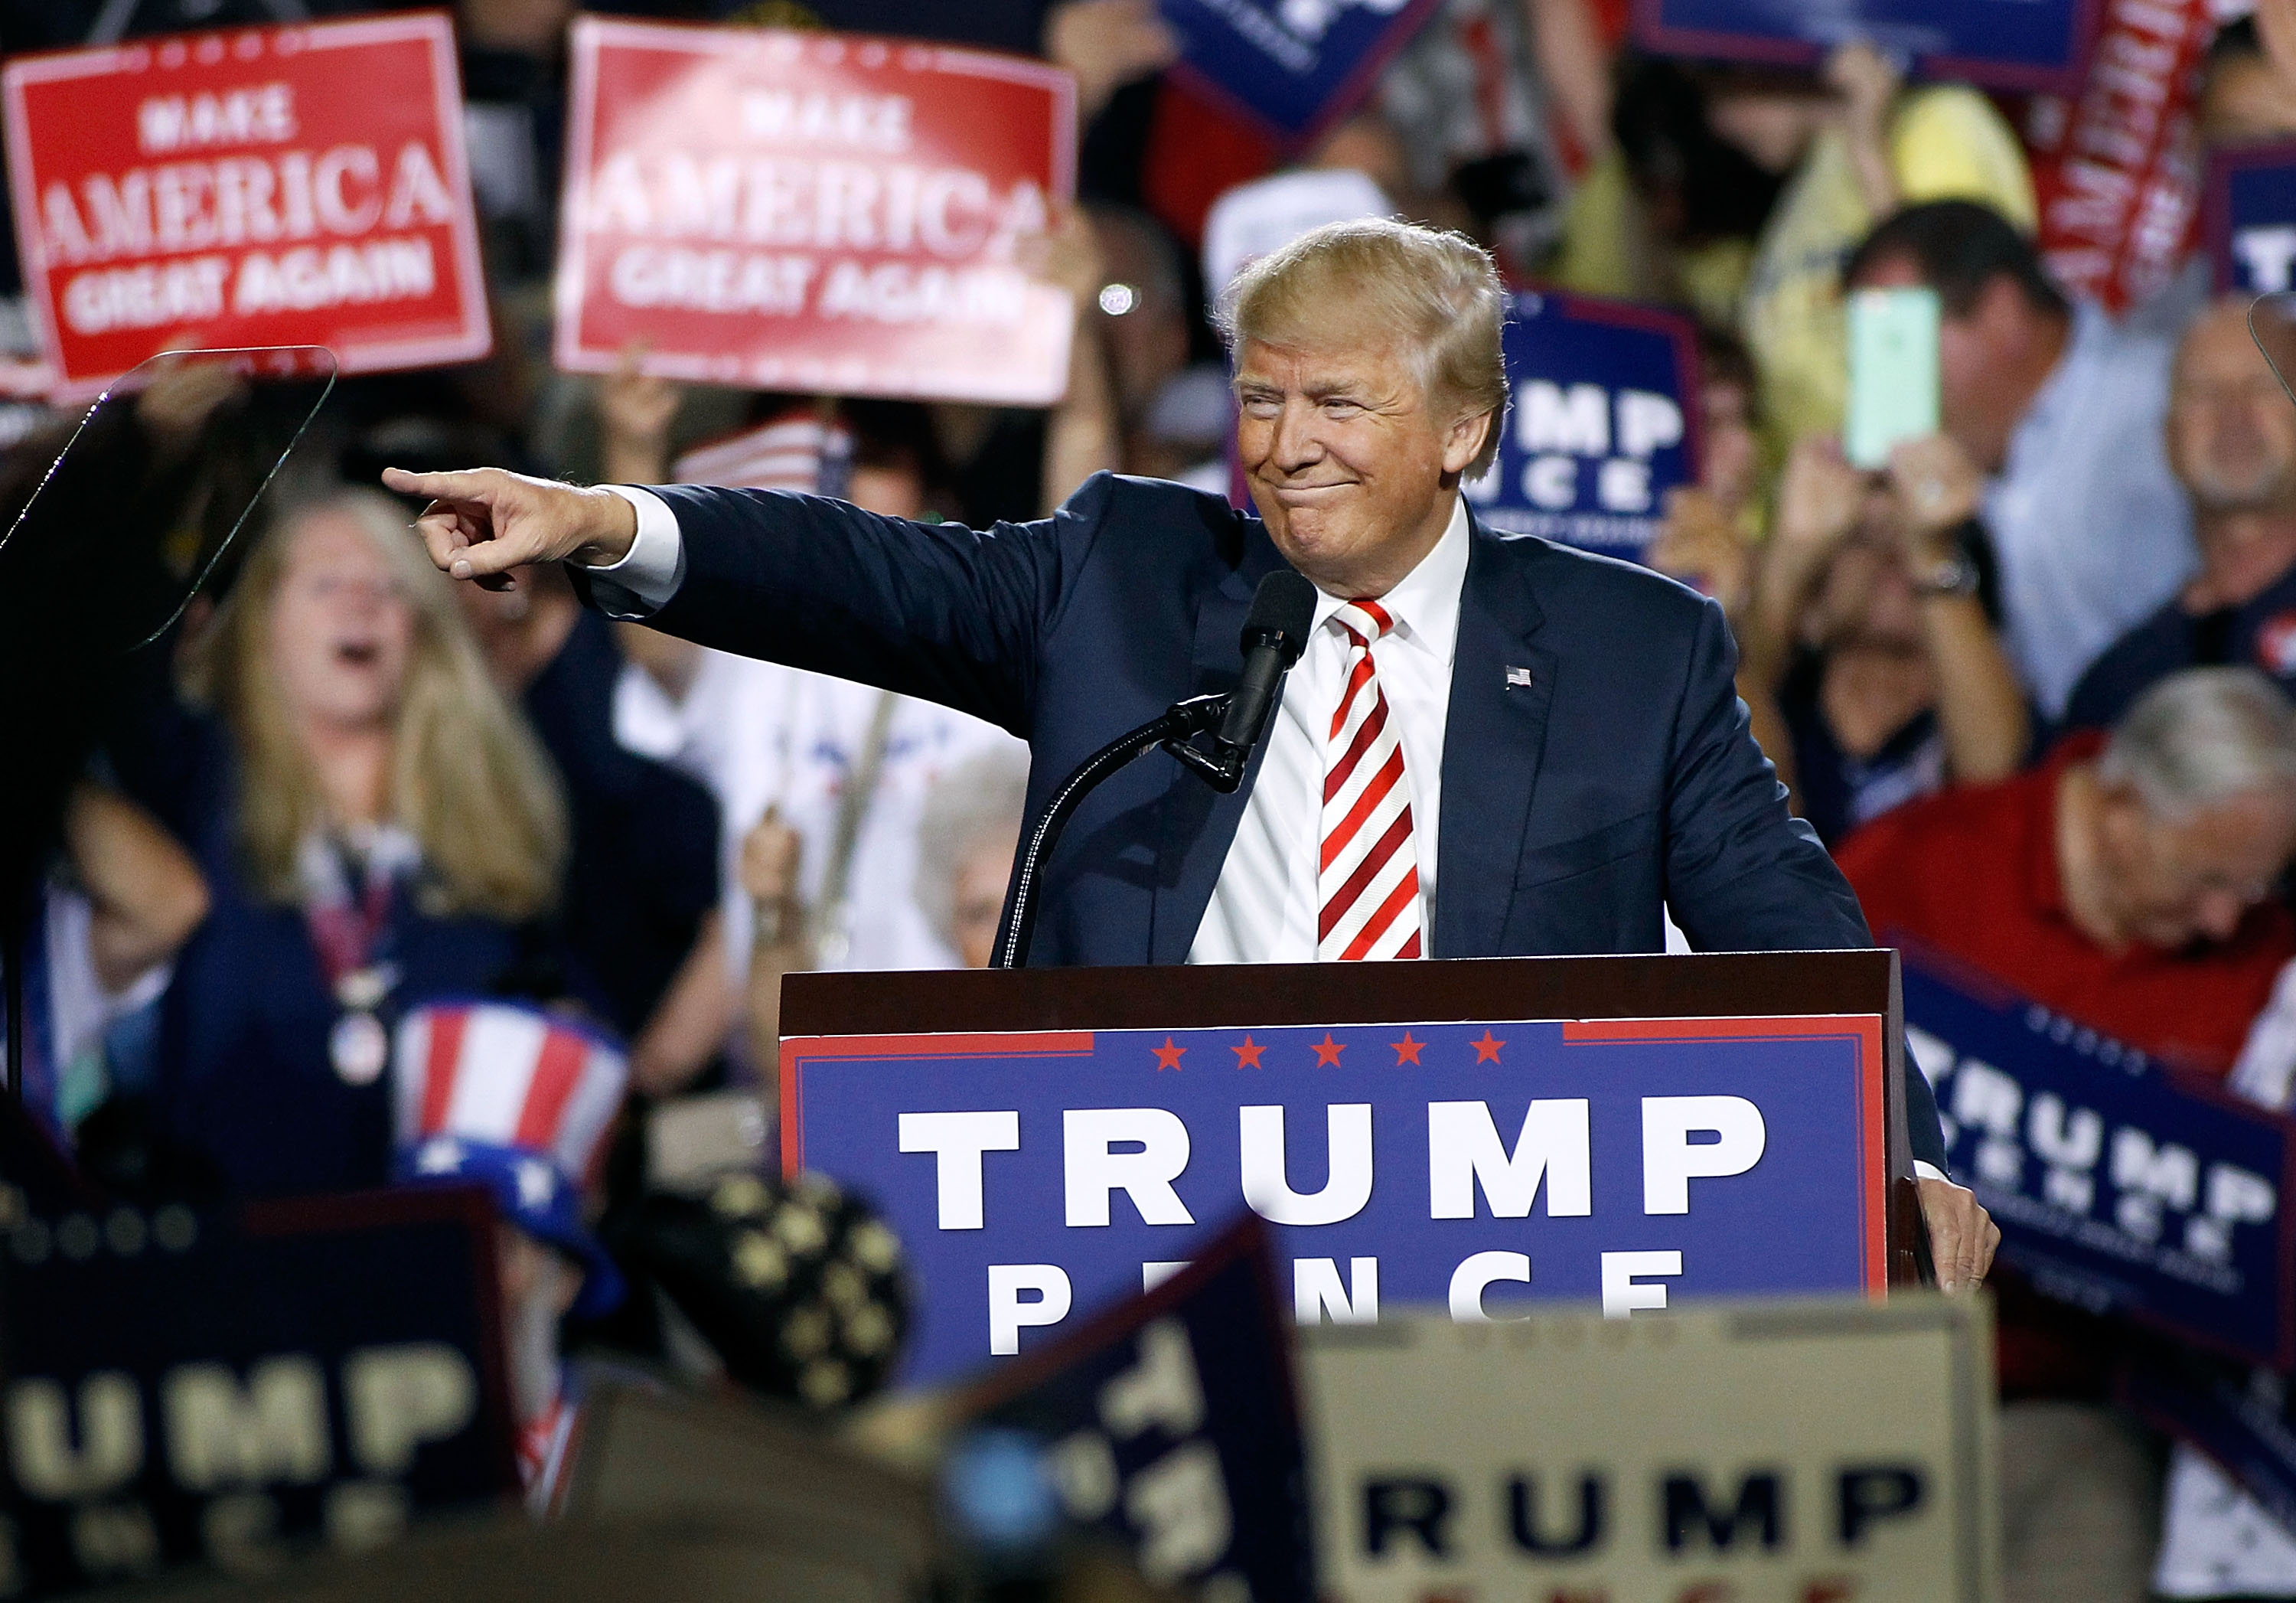 PRESCOTT VALLEY, AZ - OCTOBER 04: Republican presidential nominee Donald Trump points out to the crowd of supporters as he arrives at a campaign rally on October 4, 2016 in Prescott Valley, Arizona. (Photo by Ralph Freso/Getty Images)